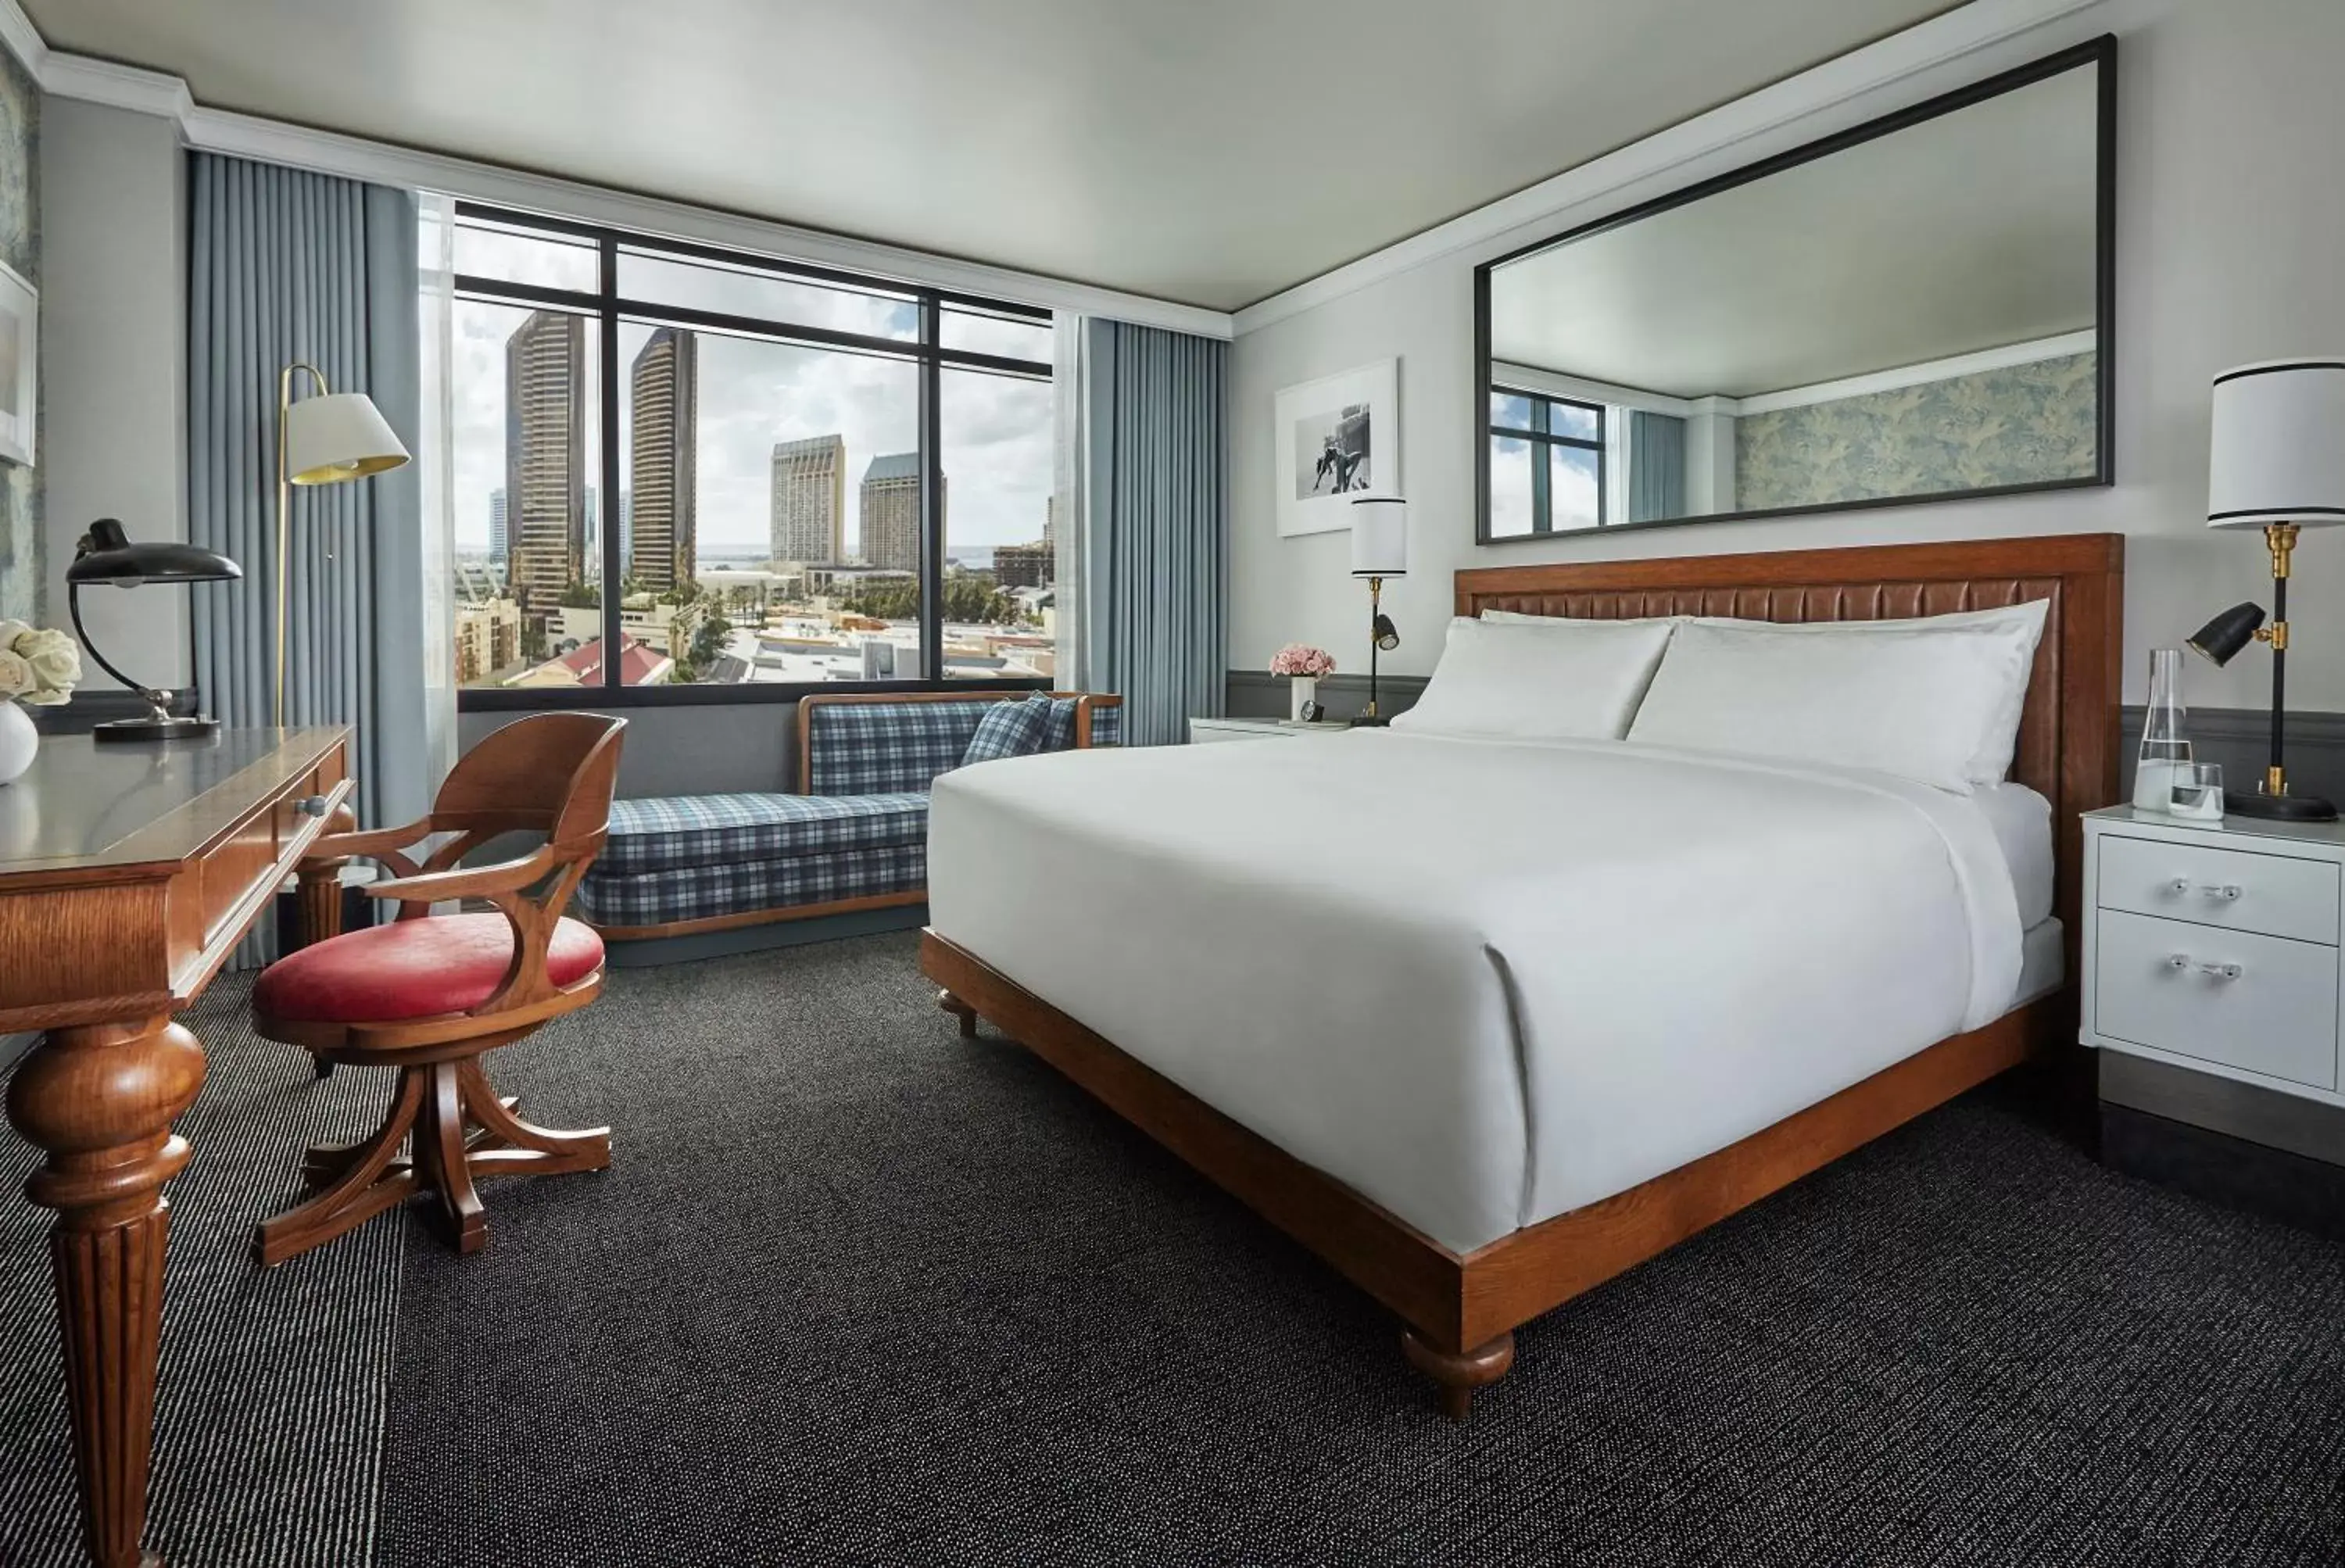 Bed, Room Photo in Pendry San Diego